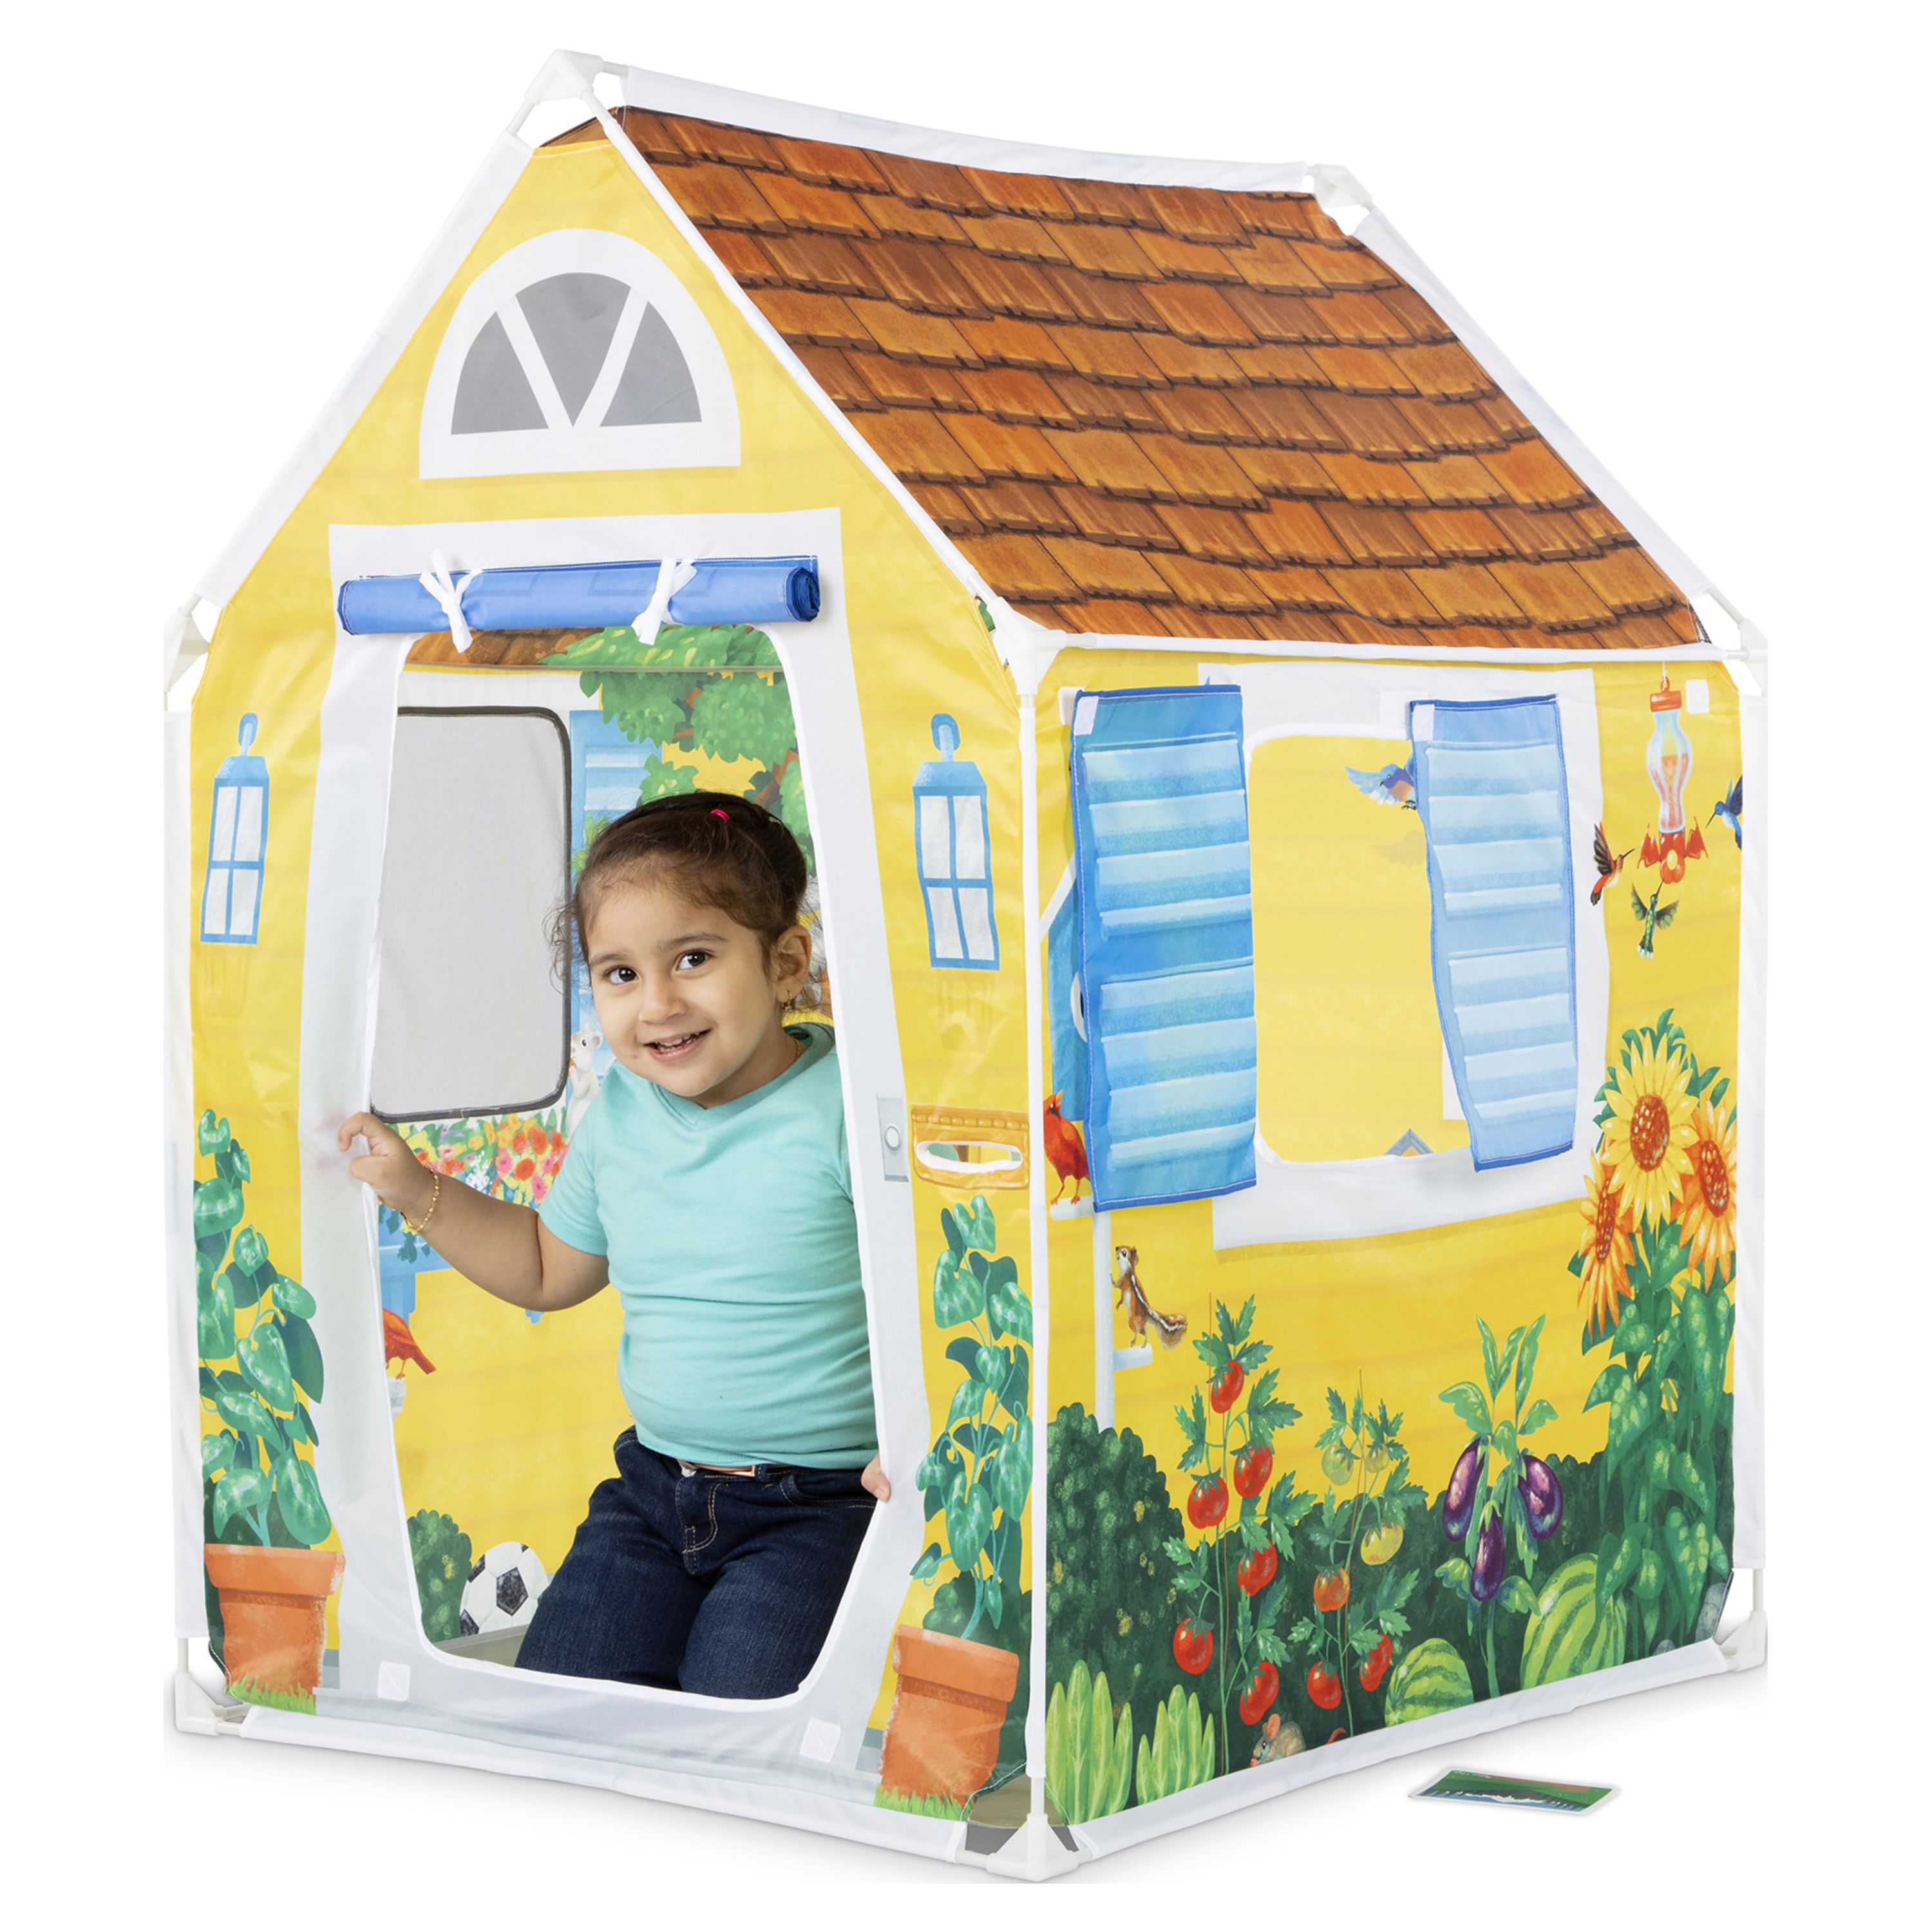 Melissa & Doug Cozy Cottage Fabric Play Tent and Storage Tote - image 4 of 9